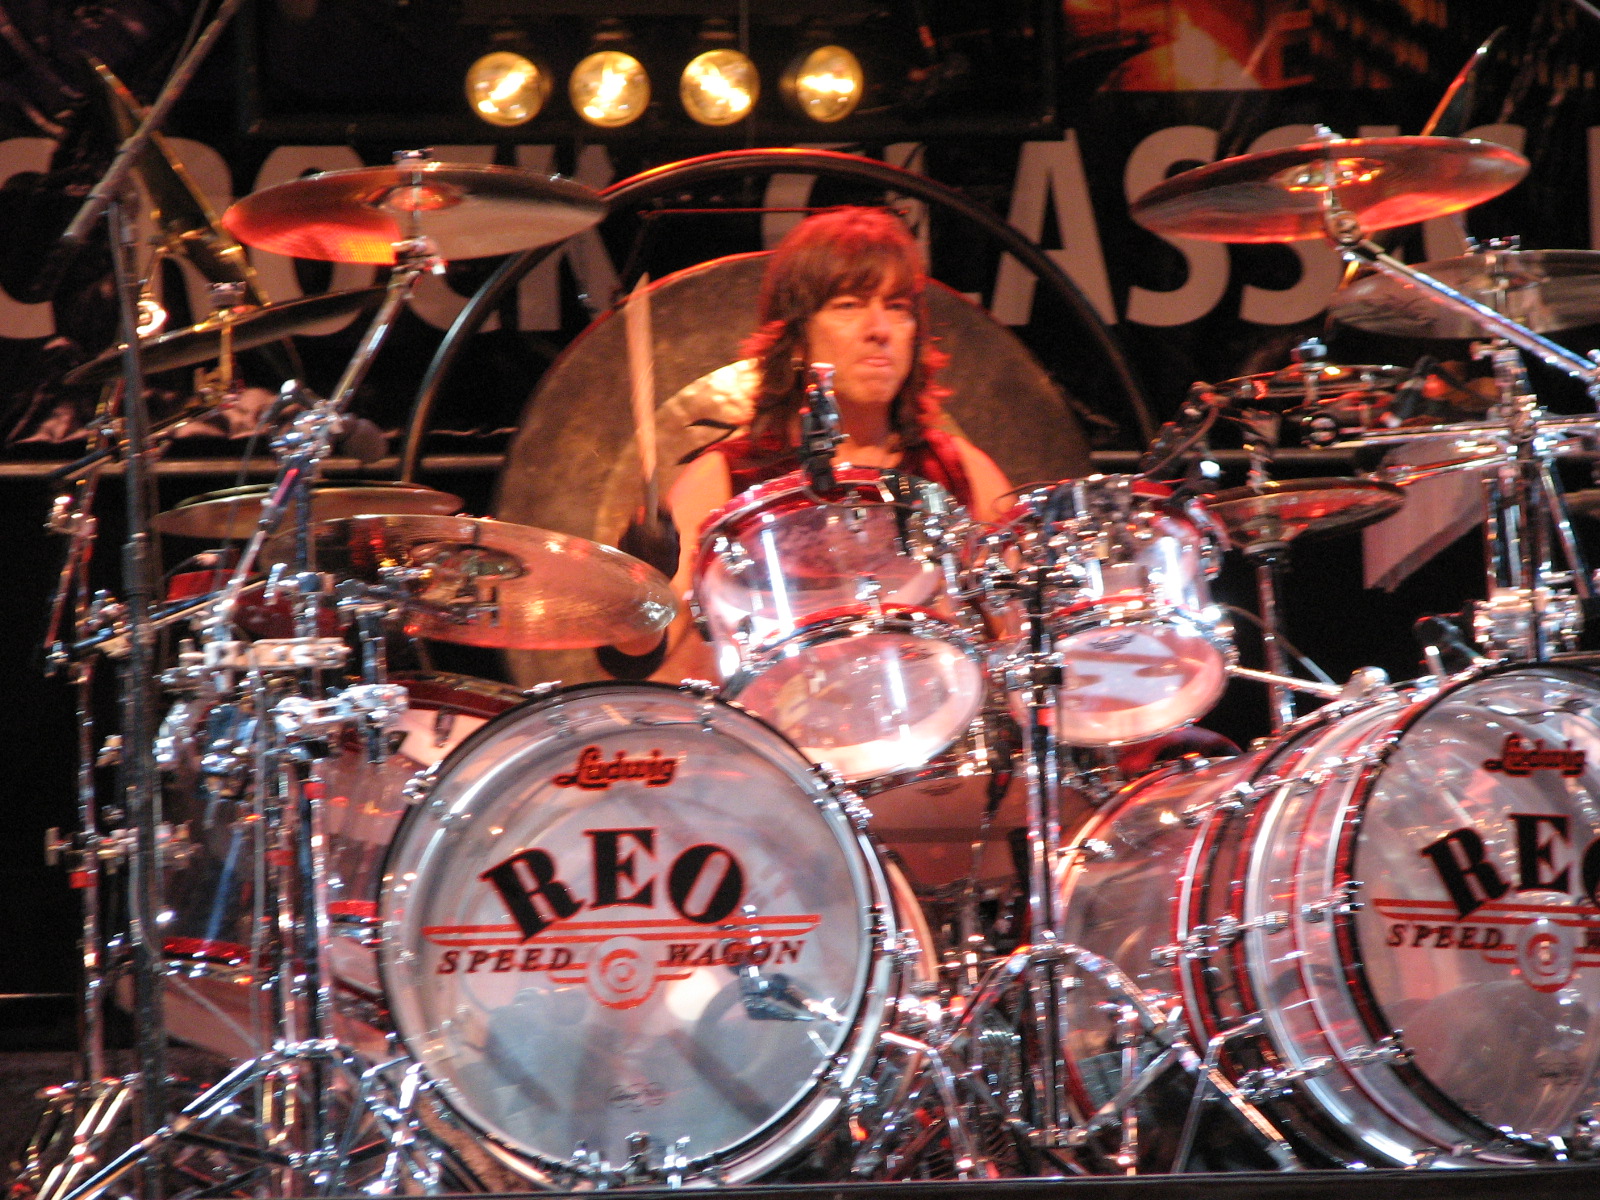 a woman is playing on a large drum kit